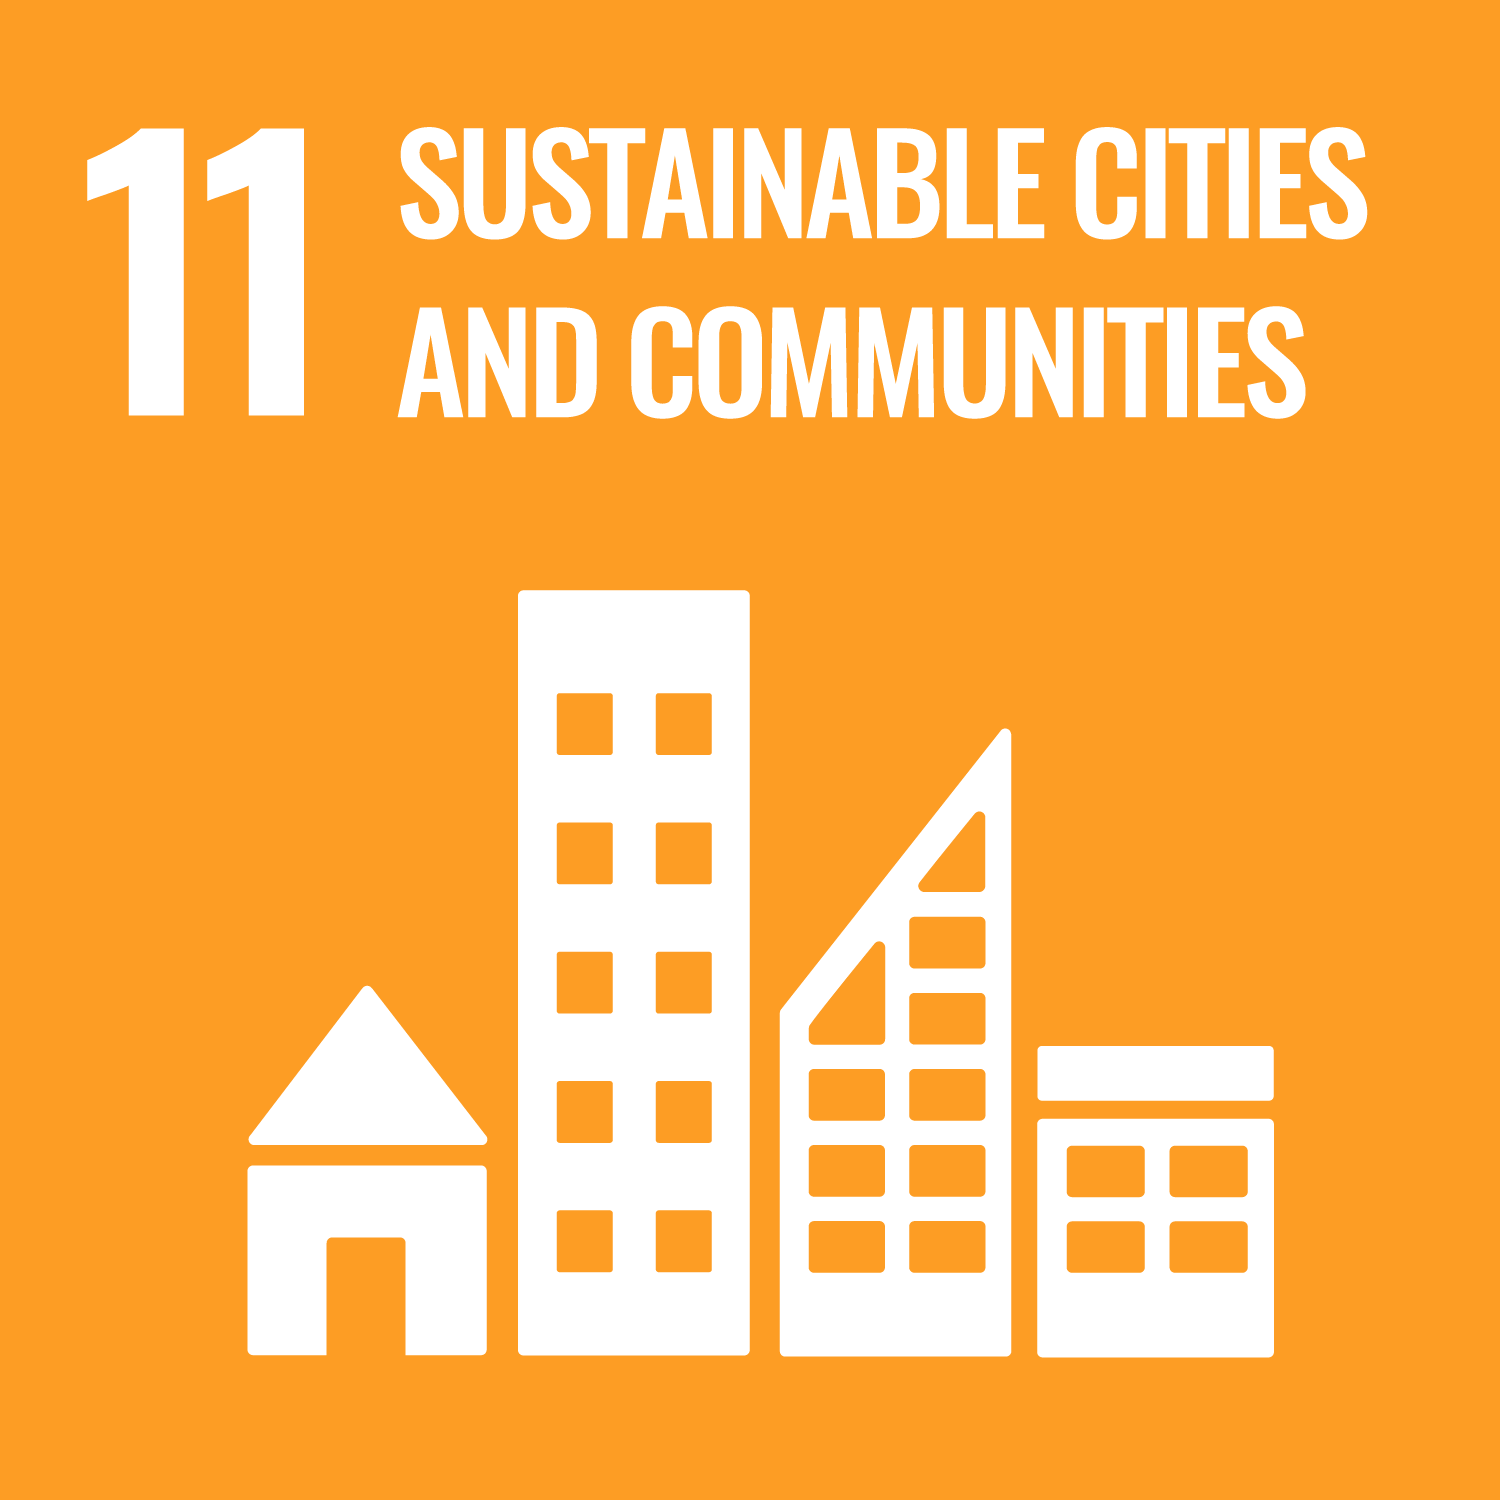 11 SUSTAINABLE AND COMMUNICATIES